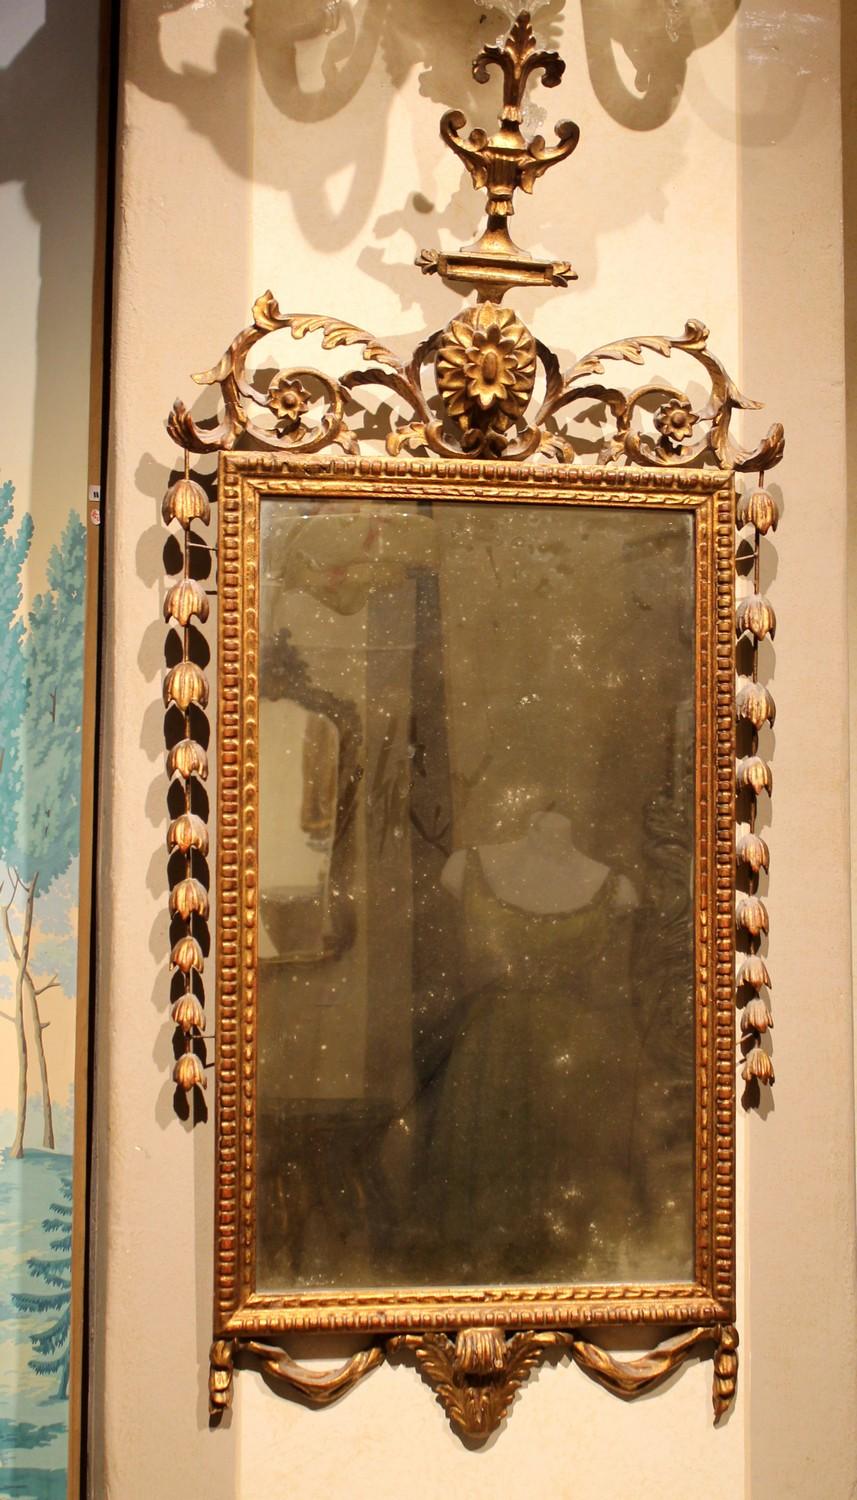 A fine Italian early 20th century giltwood rectangular swag mirror in Regency neoclassical style of narrow proportions and richly carved in a drapery style motif.
The rectangular mirror plate surmounted by pierced carvings featuring scrolls,